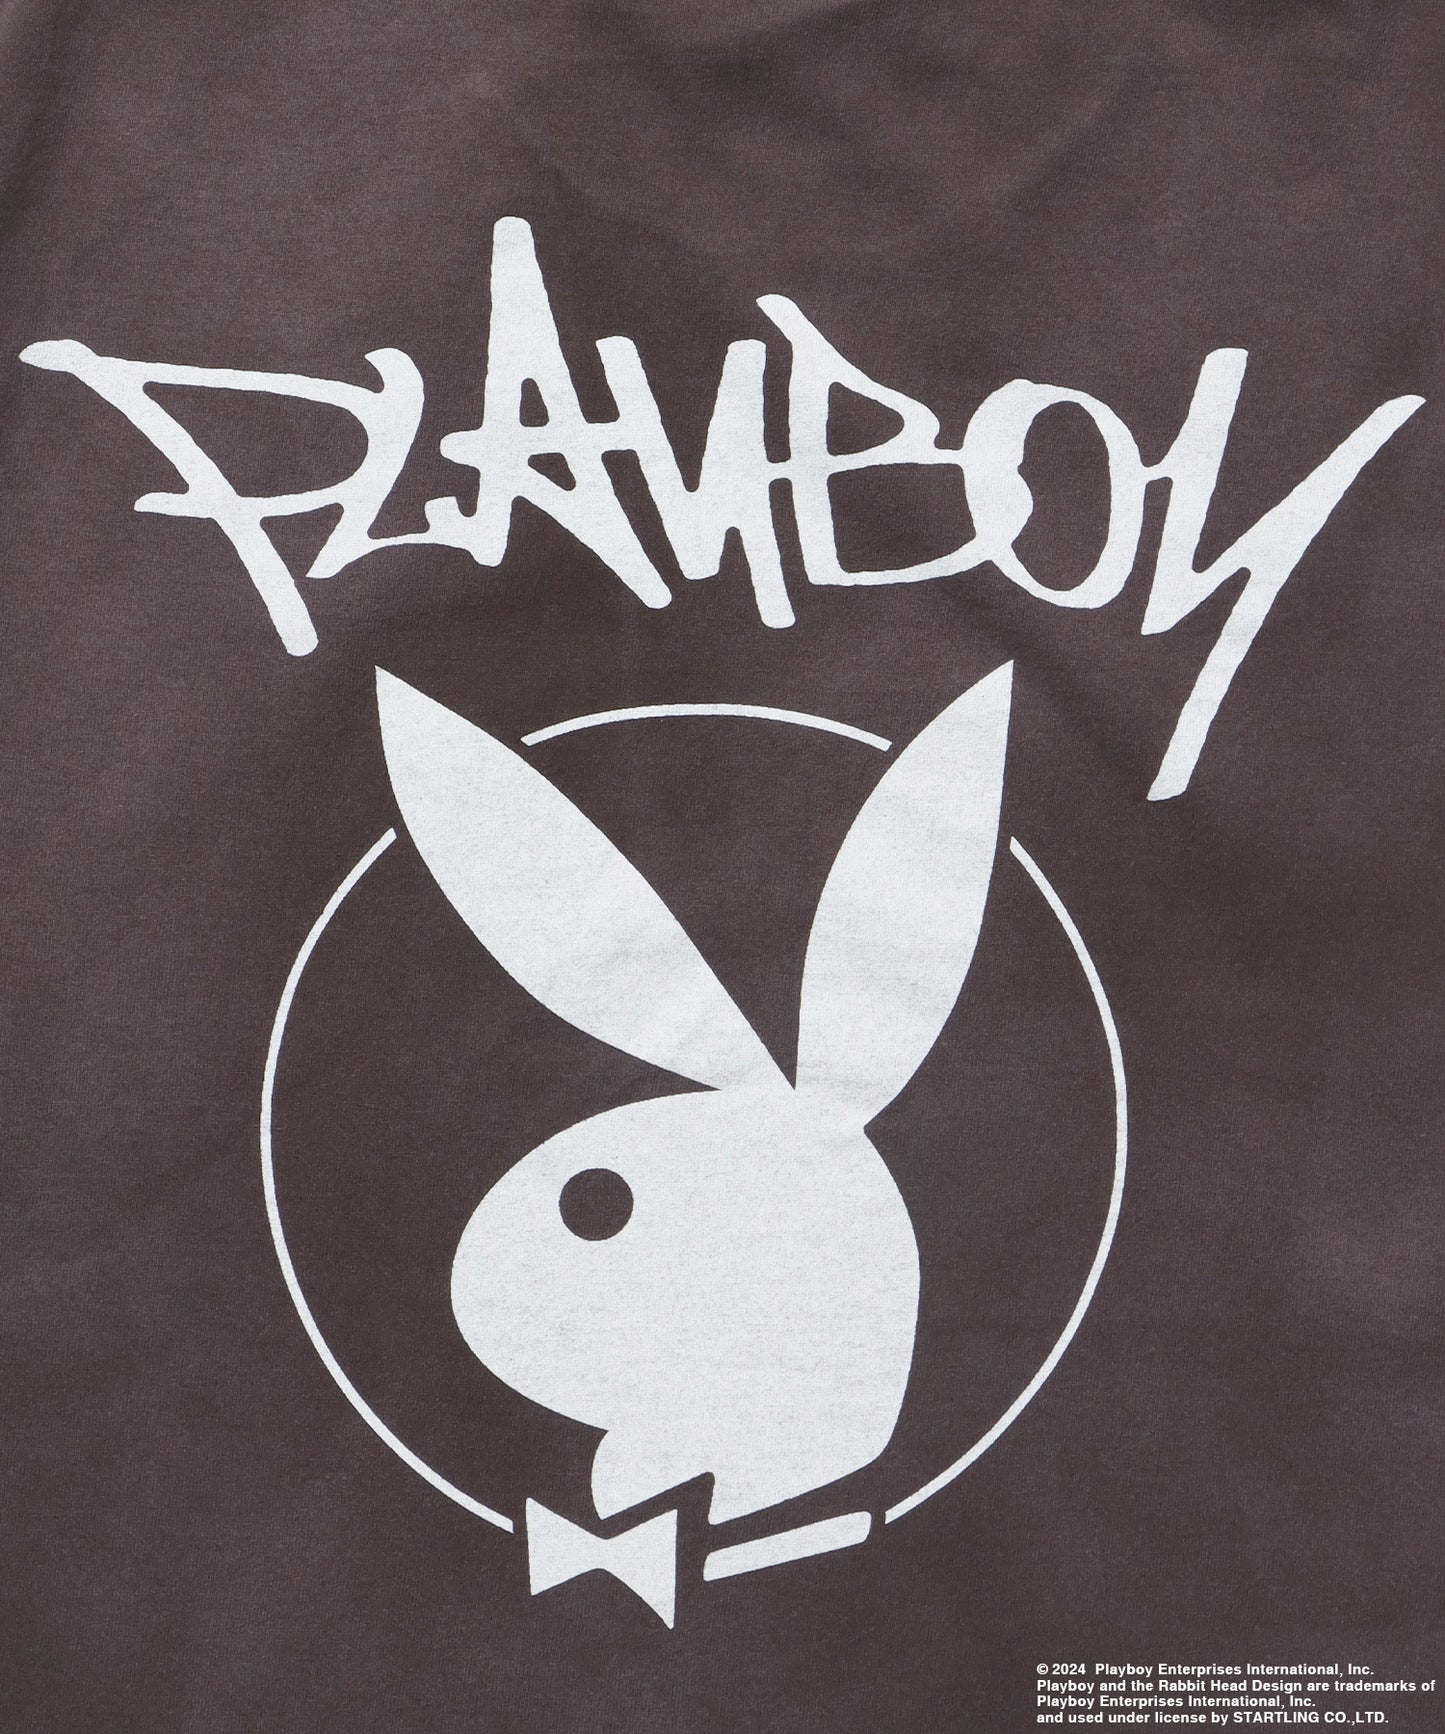 PB O.G LOGO FADE S/S TEE / PLAYBOY×Sequenz フェード加工 90s ヴィンテージ Tシャツ グラフィティ プリント 半袖 ダークブラウン